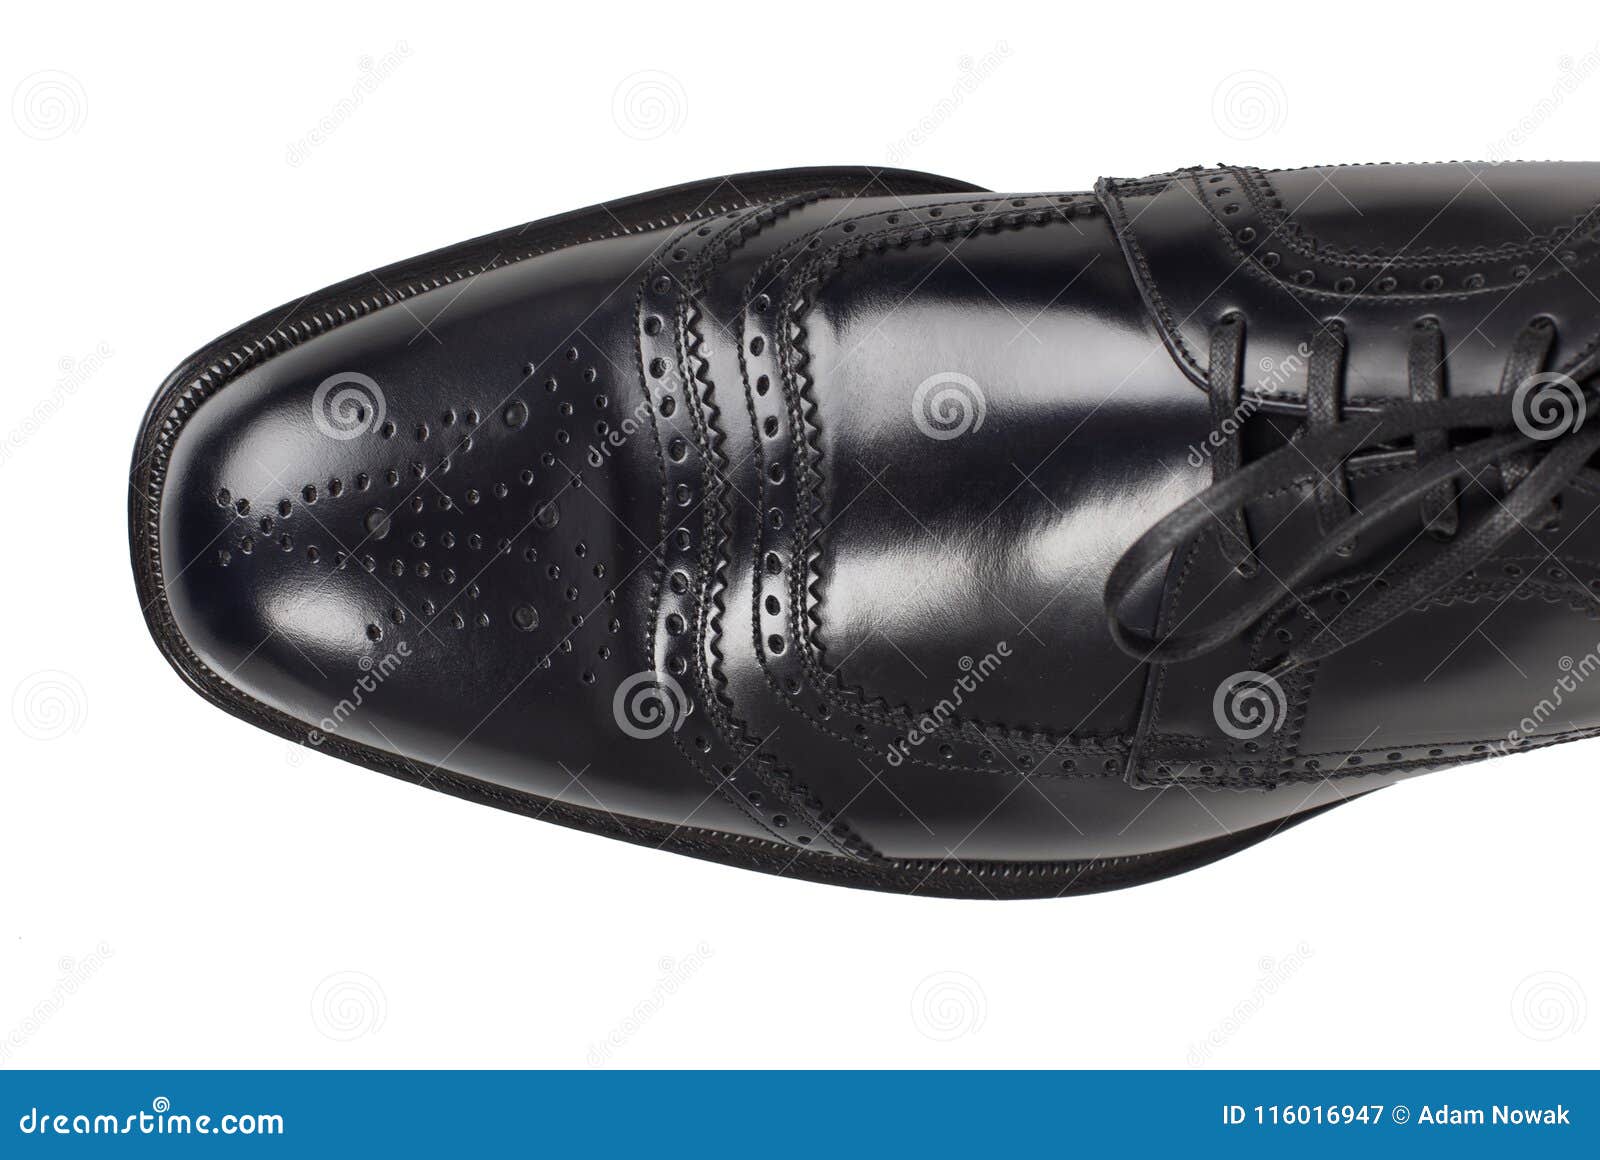 Men Single Black Shoe Isolated. on a White, Top View. Stock Image ...